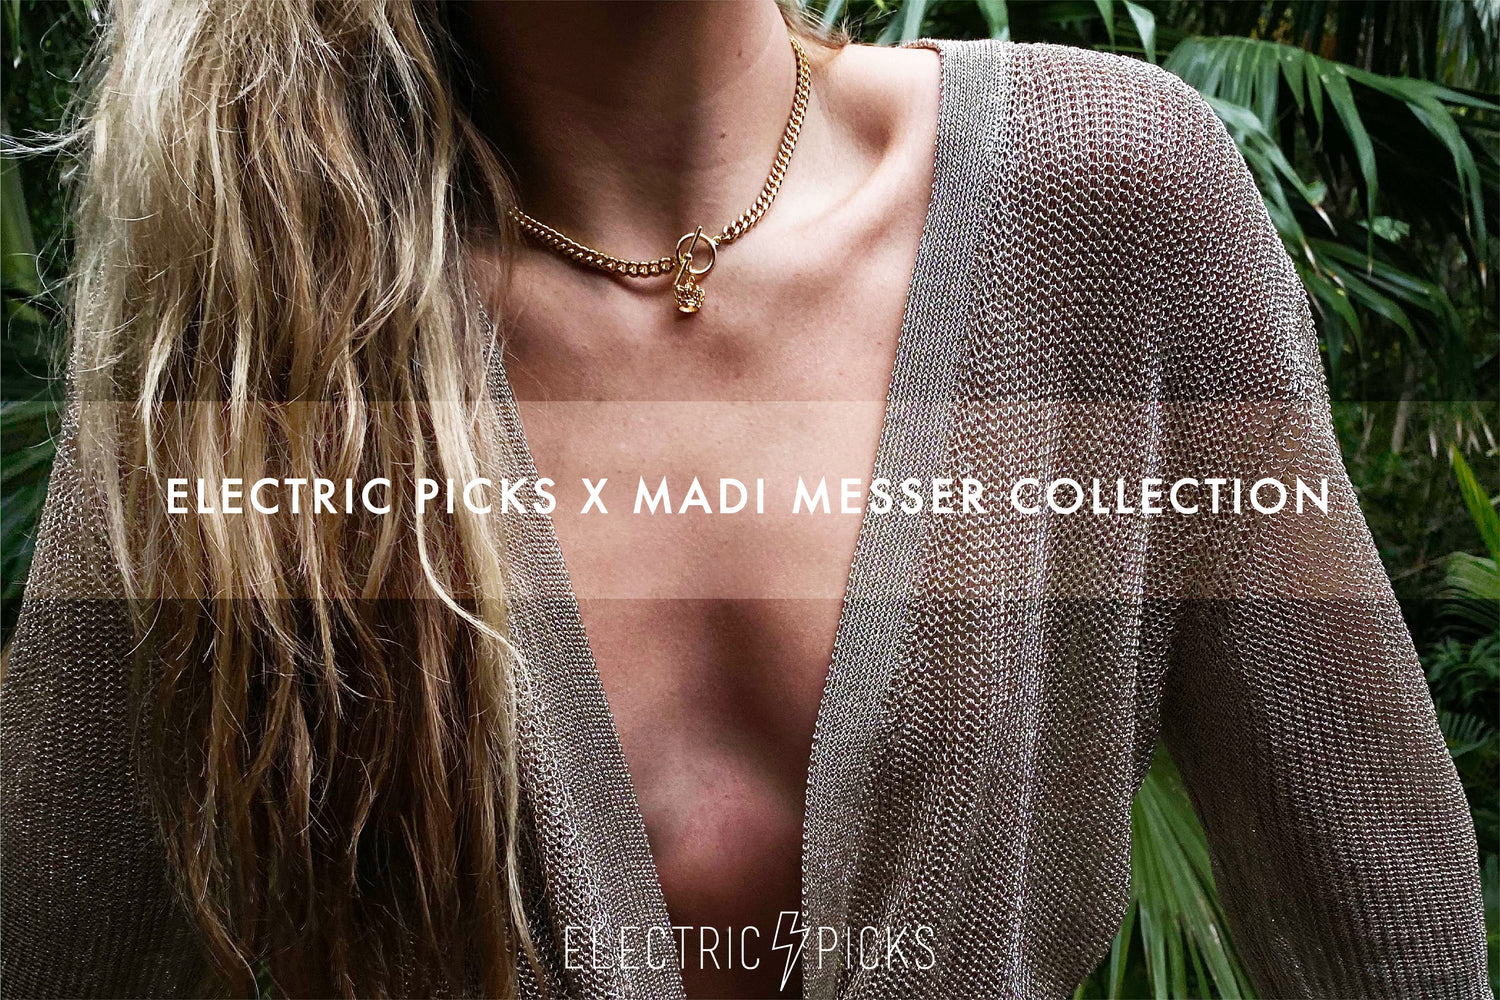 Behind The Madi Messer Collection